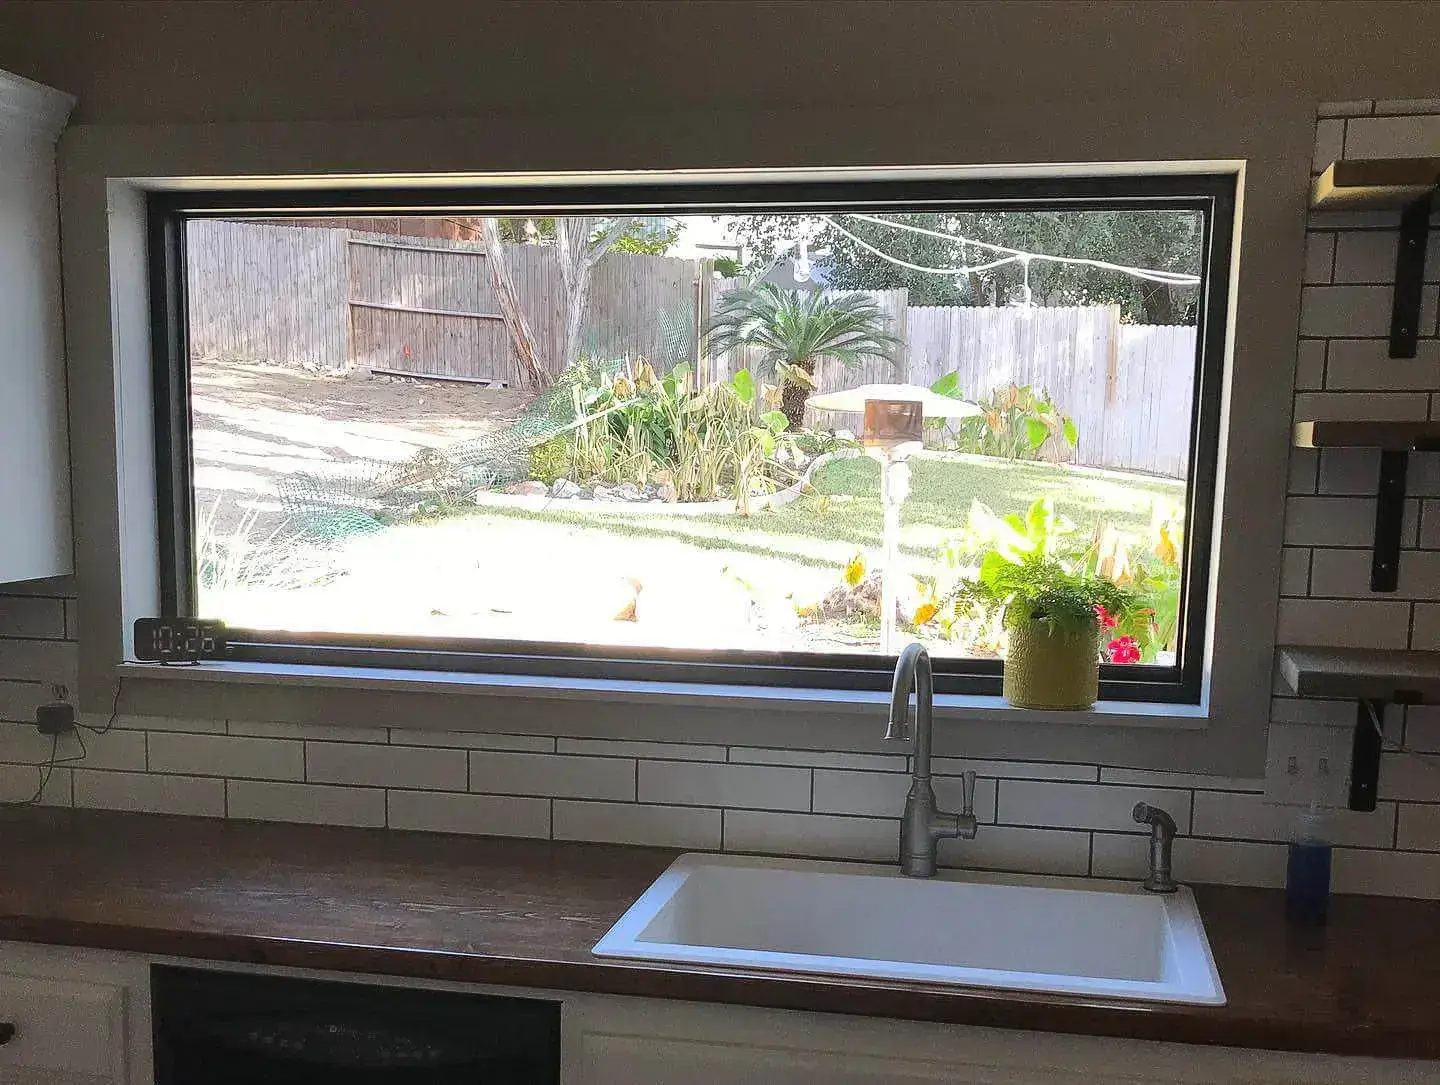 After kitchen window replacement